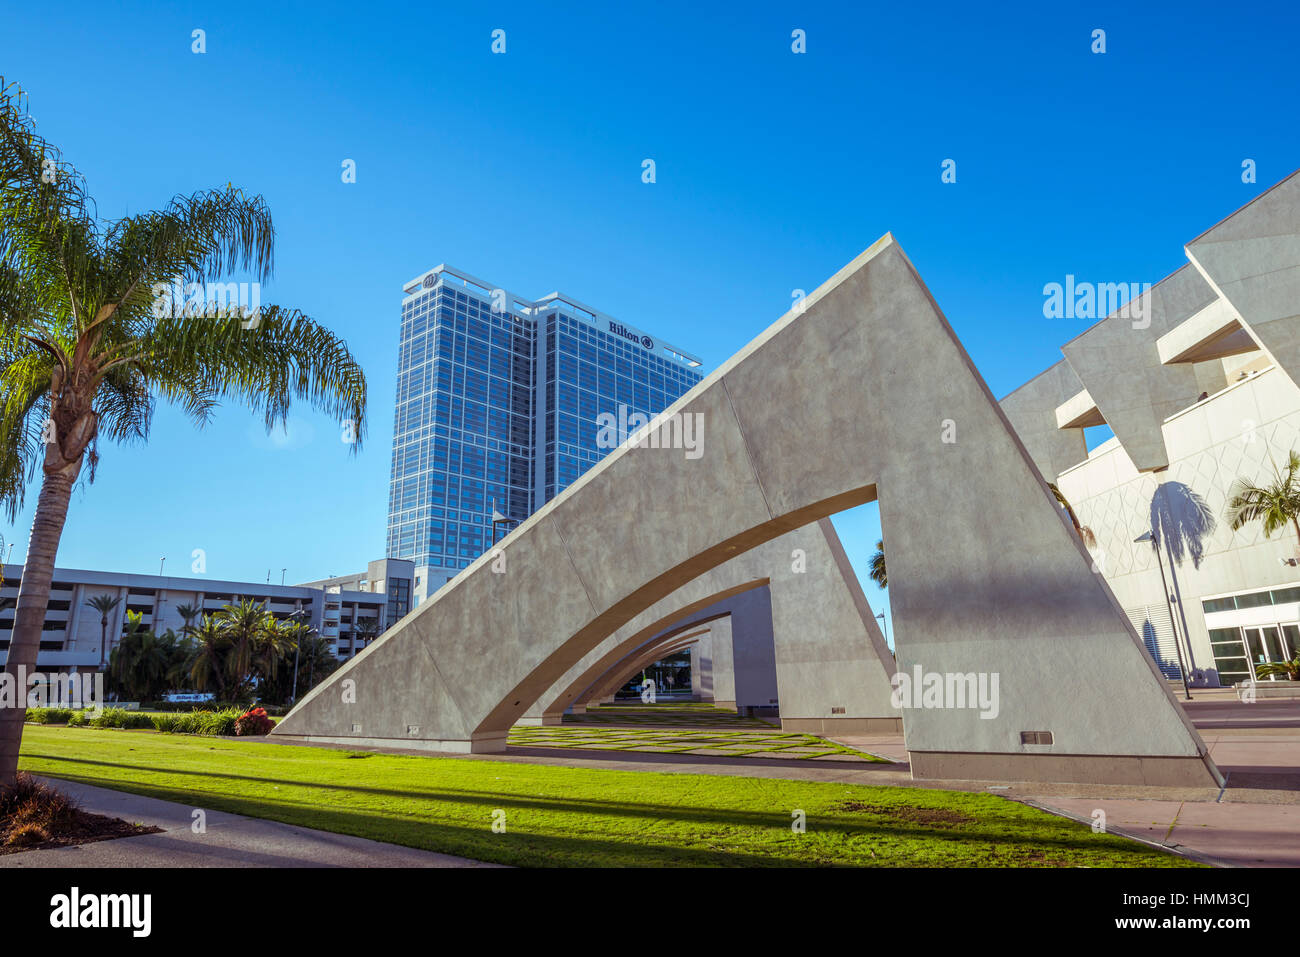 Architecture at the San Diego Convention Center grounds; the Hilton San Diego Bayfront in the background. San Diego, California. Stock Photo